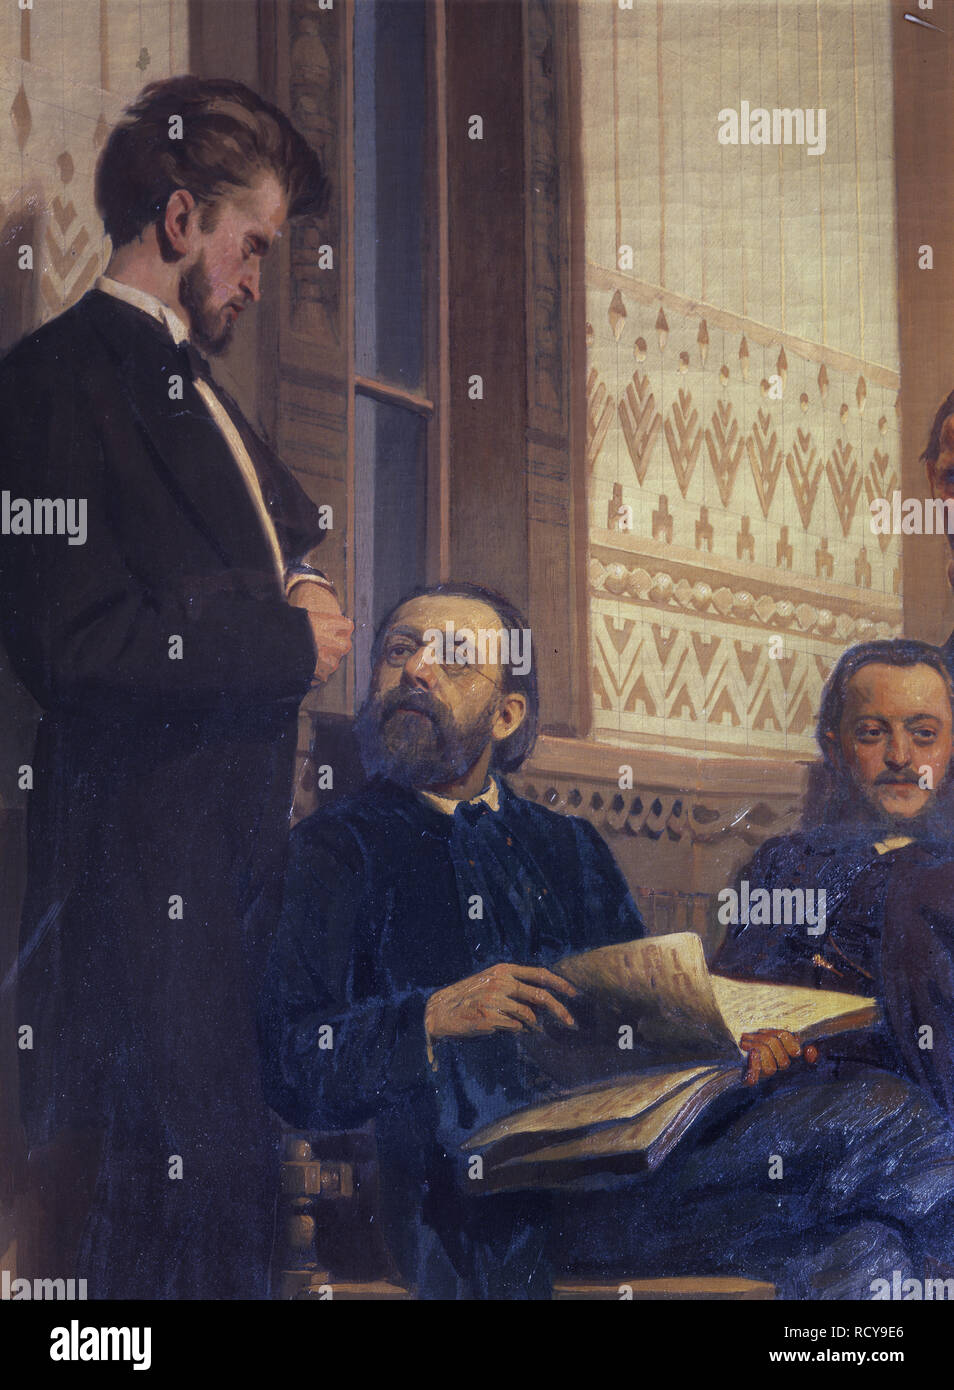 The composers Eduard Napravnik and Bedrich Smetana (Detail of the painting Slavonic composers). Museum: State Conservatory, Moscow. Author: REPIN, ILYA YEFIMOVICH. Stock Photo